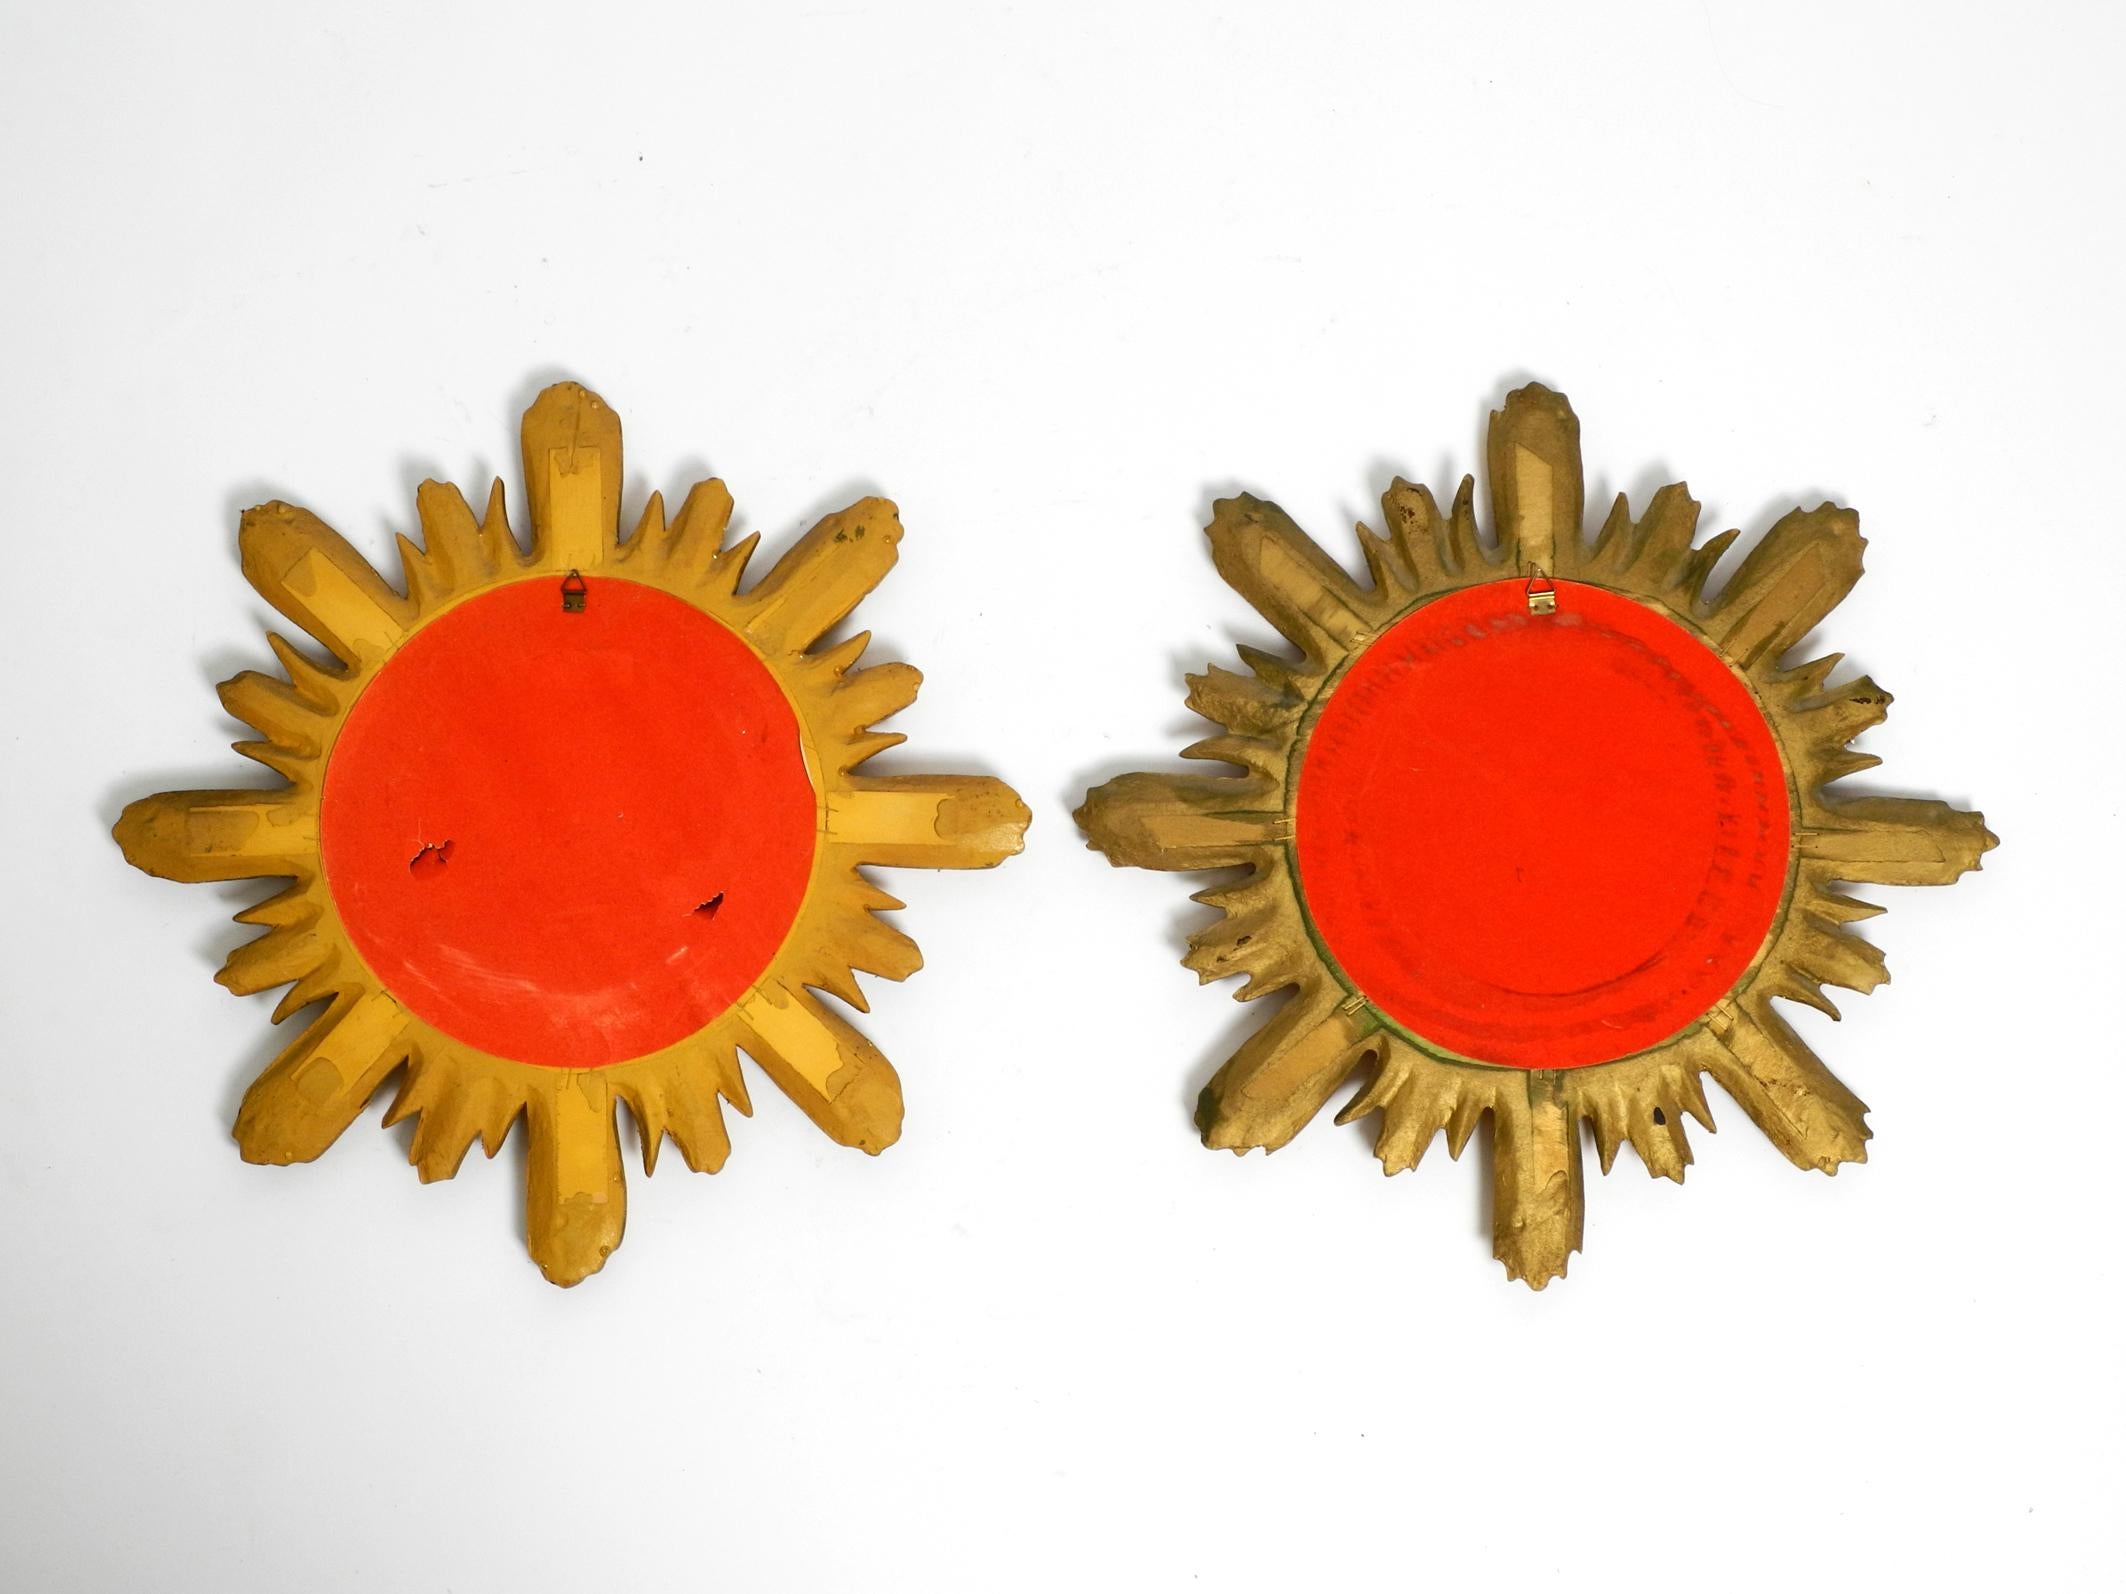 Pair of gold-plated mid-century sunburst wall mirrors made of wood and resin 3